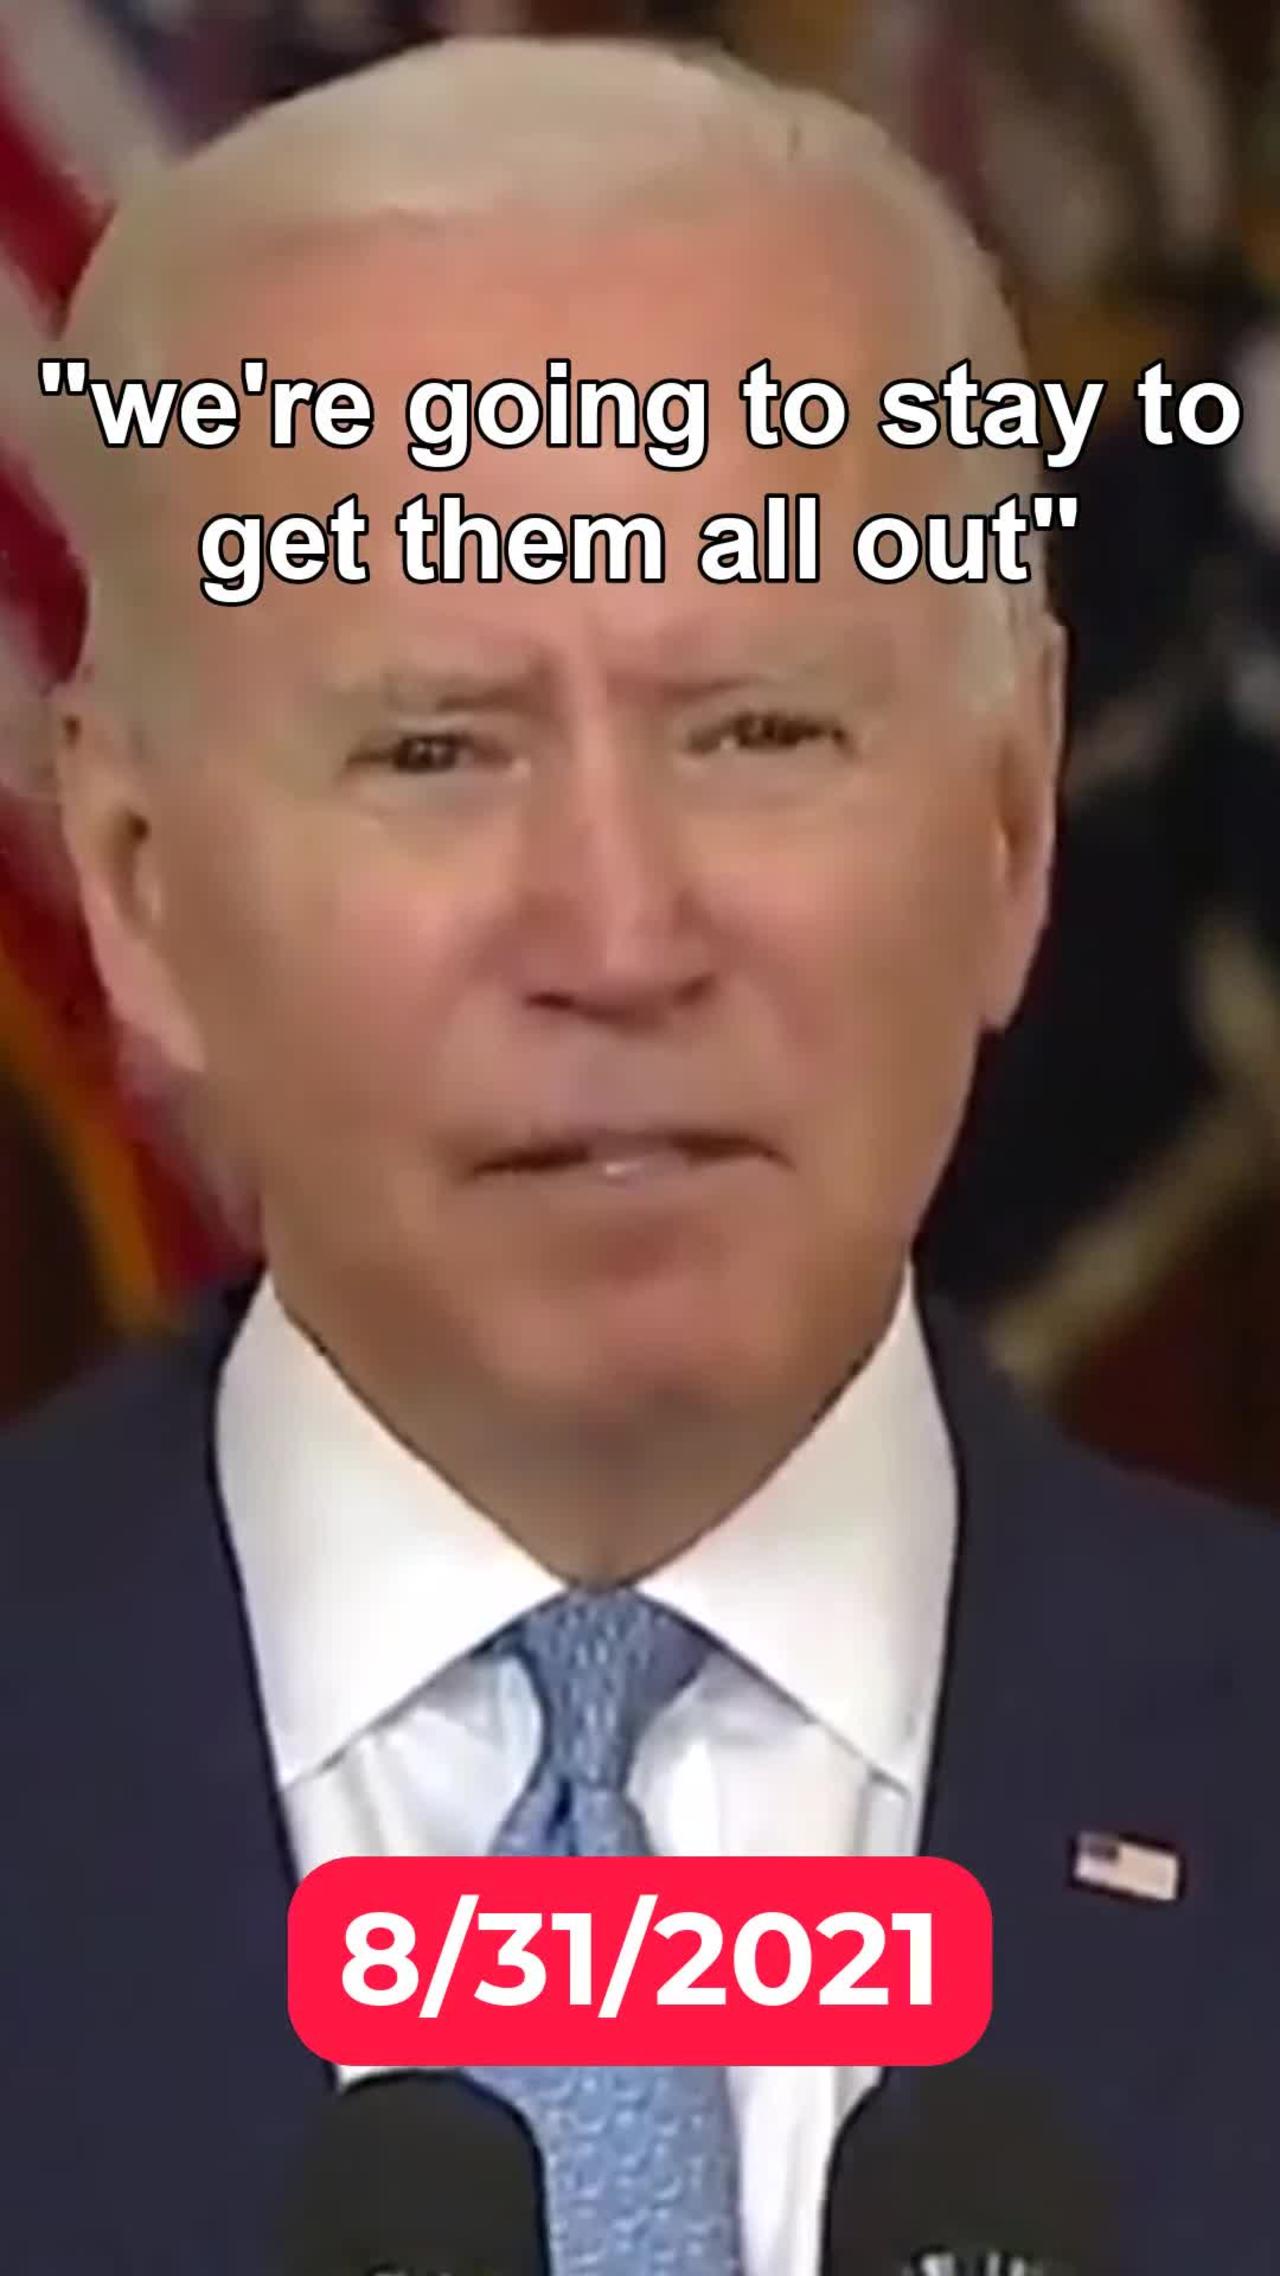 Joe Biden doesn't know what the hell is going on